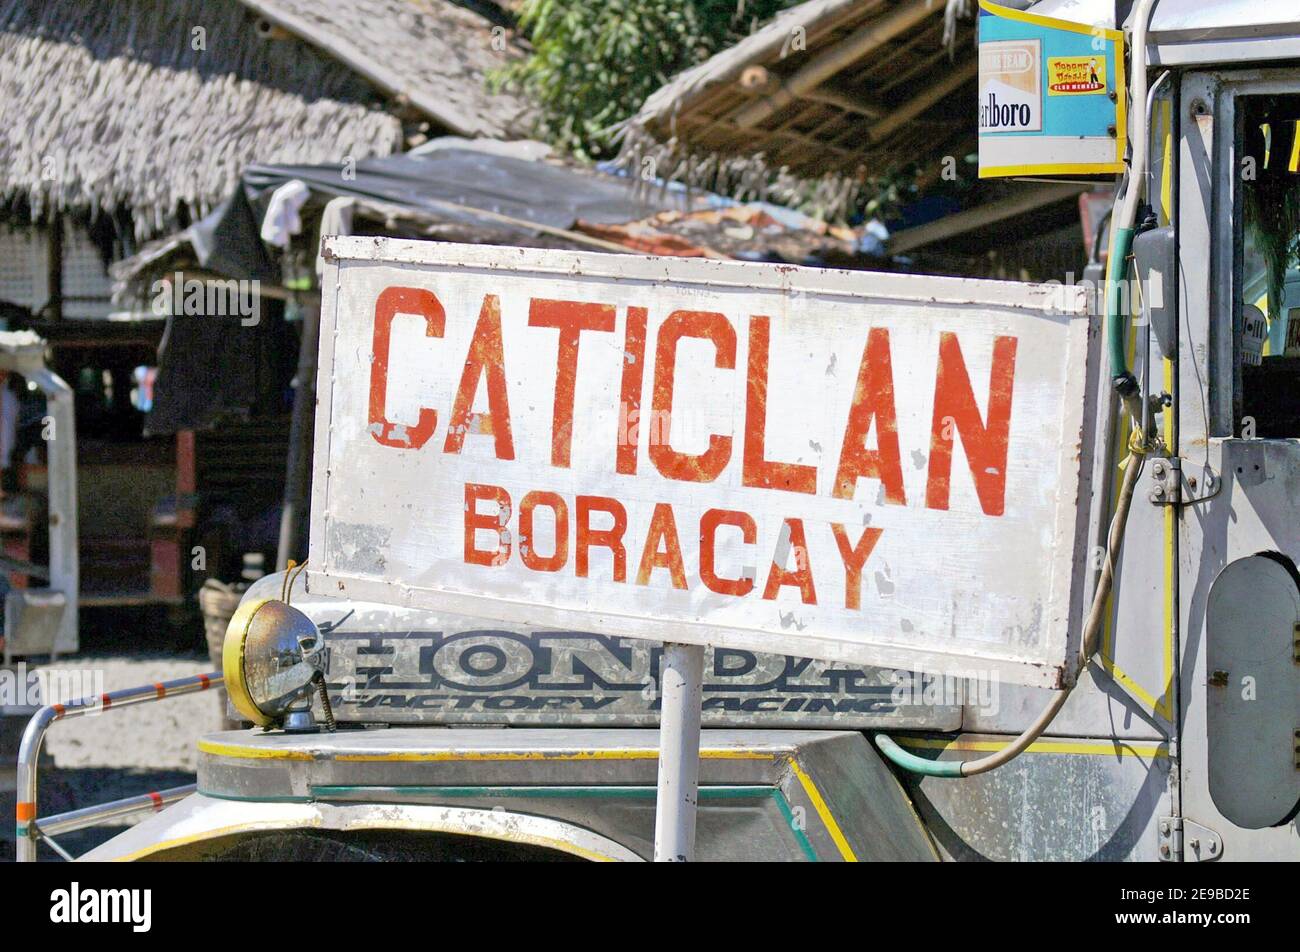 Caticlan, Boracay sign posted in front of a parked Philippines Jeepney indicates the transportation hub for land to see transport in Caticlan, Aklan, Philippines.  The majority of visitors to Boracay take a Jeepney or bus to Caticlan where they catch a banca to the resort island of Boracay. Stock Photo